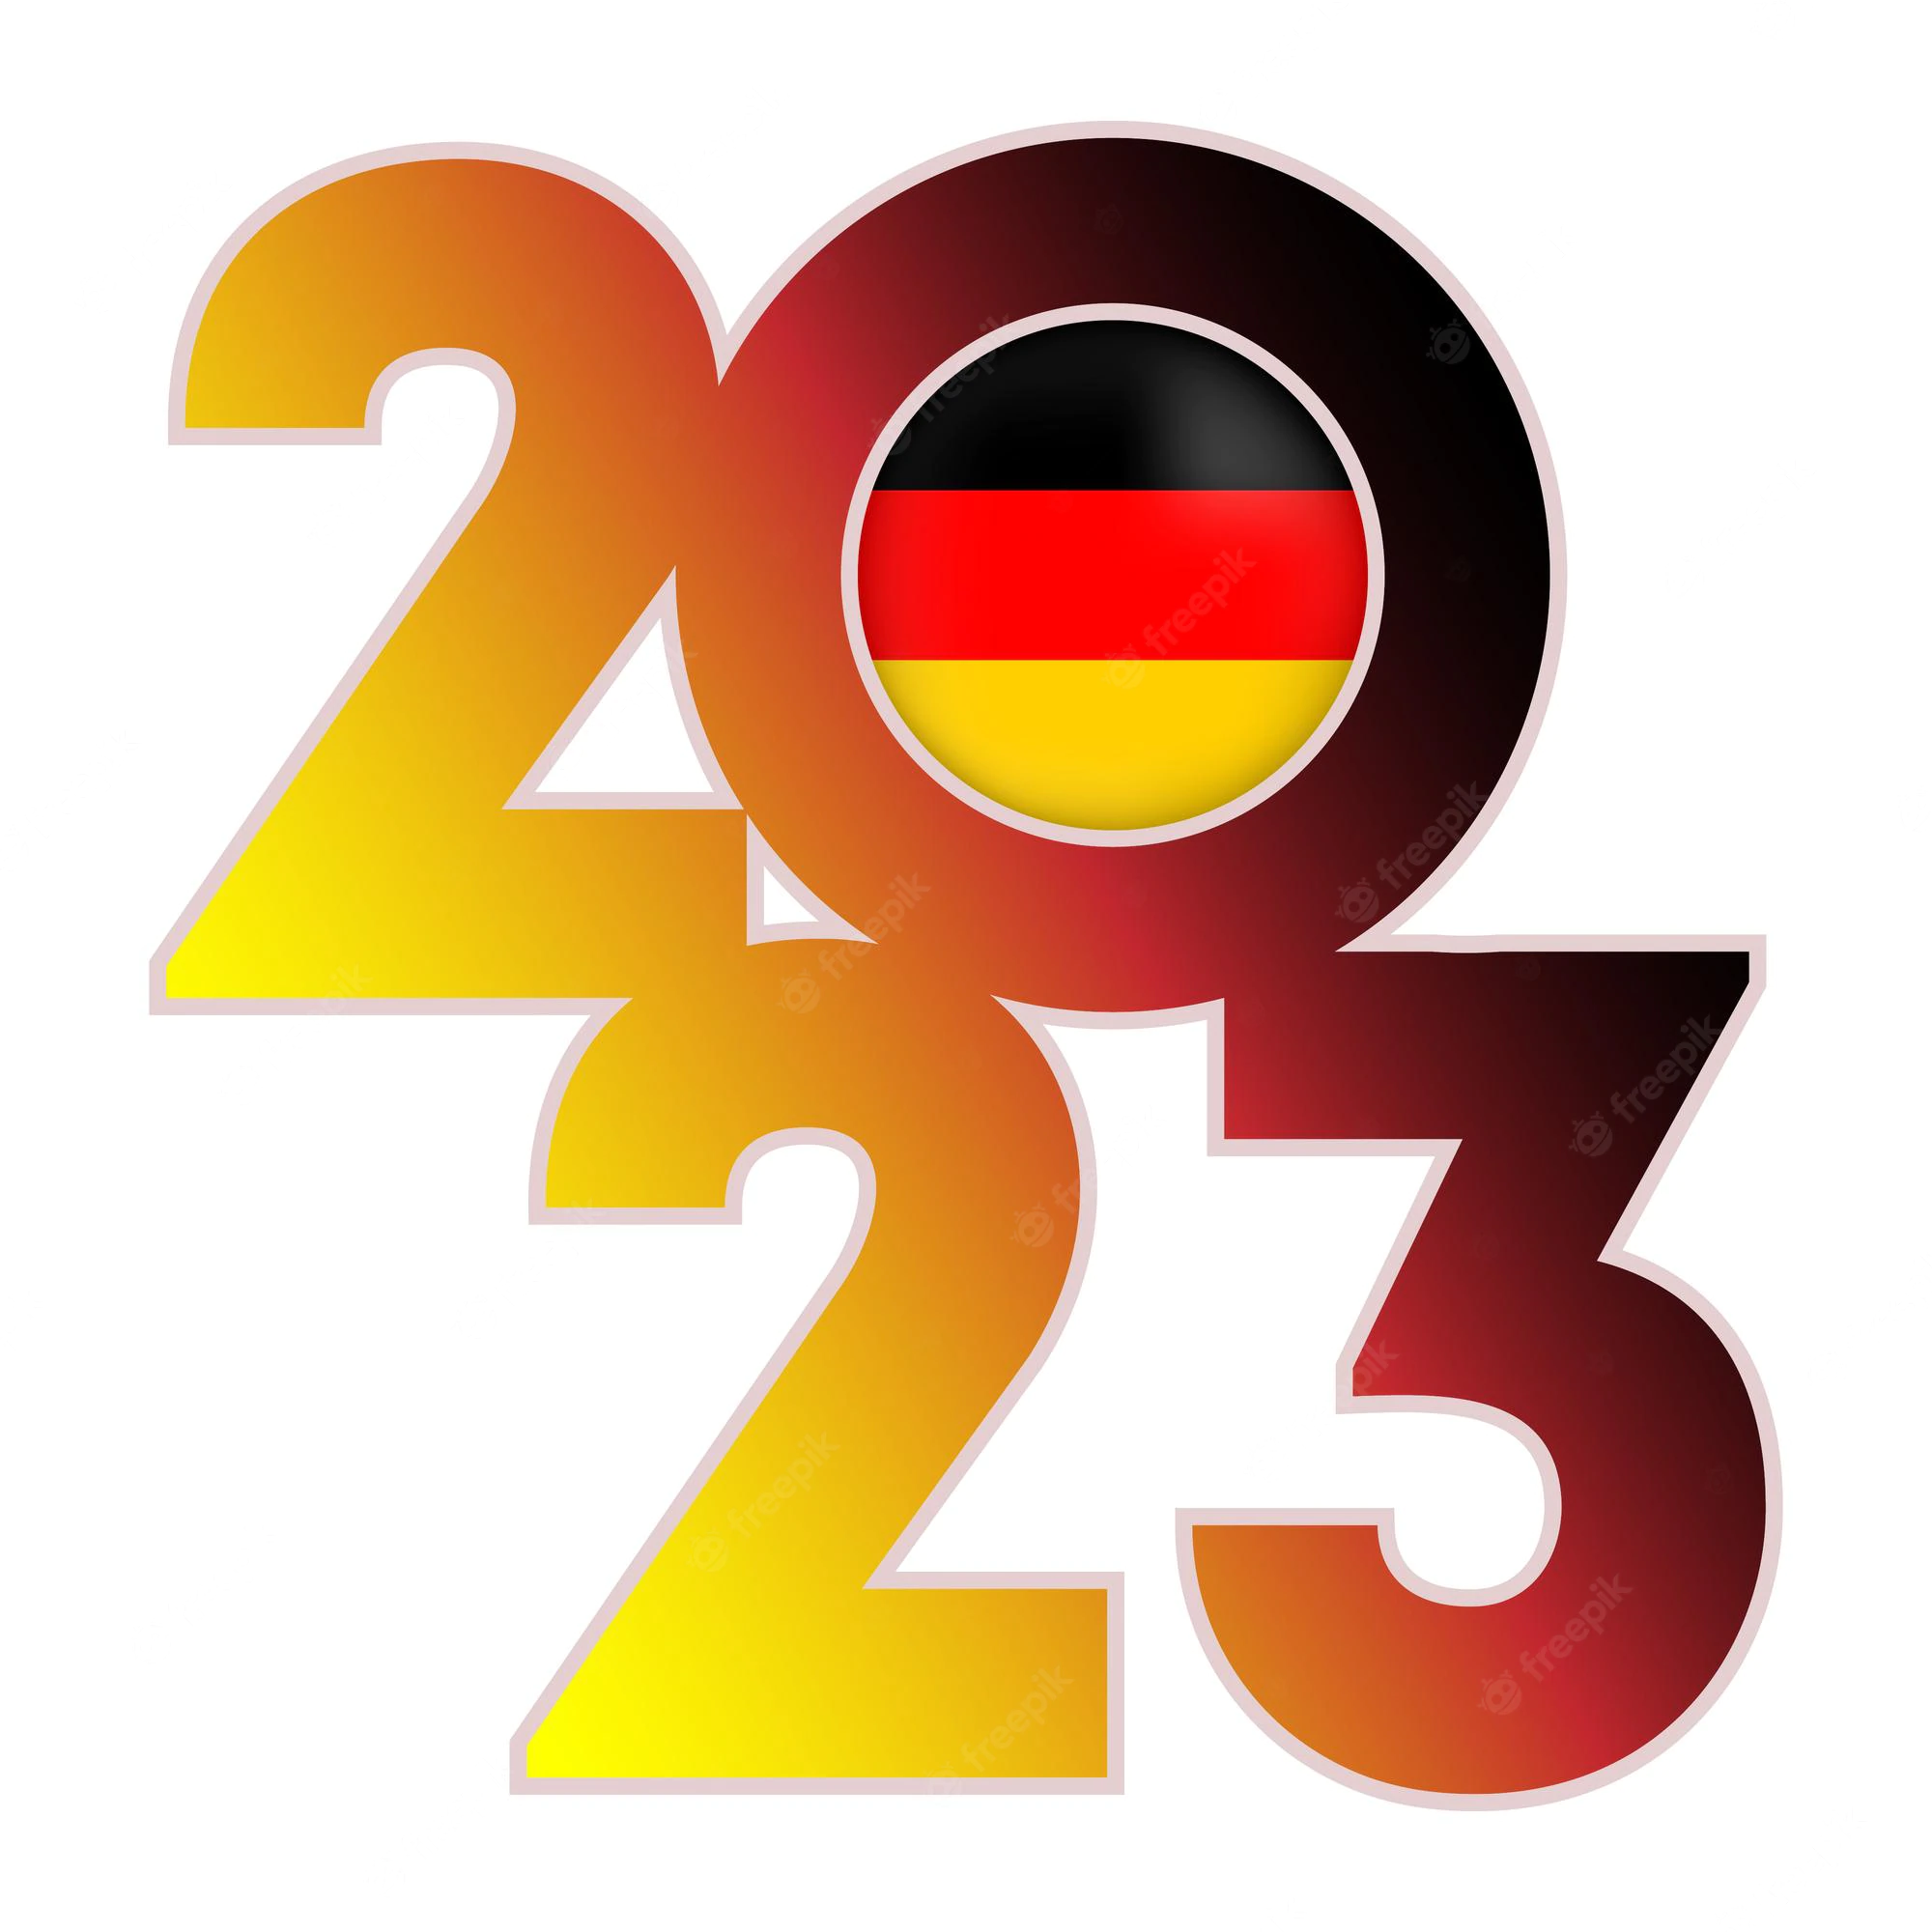 happy-new-year-2023-banner-with-germany-flag-inside-vector-illustration_601298-8671.webp